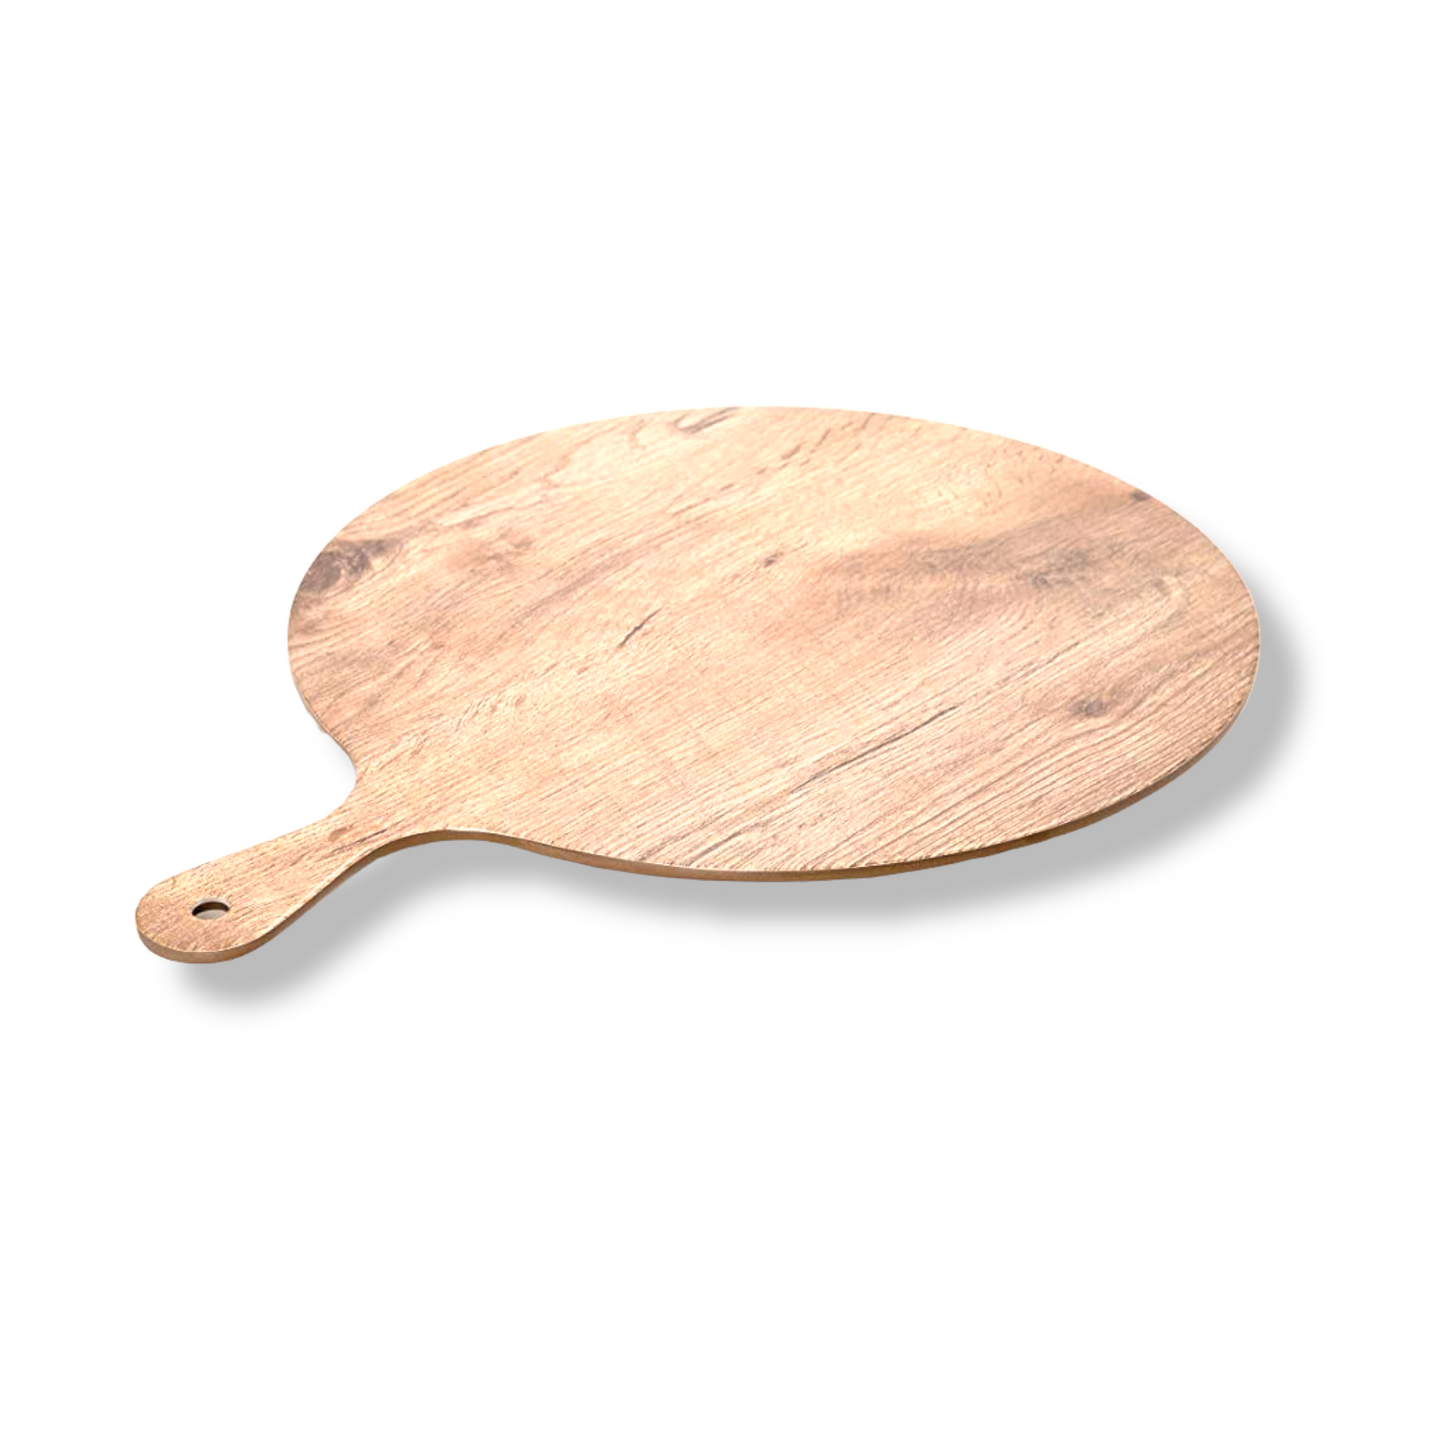 28 Cm Melamine round plate with a handle and a wooden-look finish - Lunaz Shop